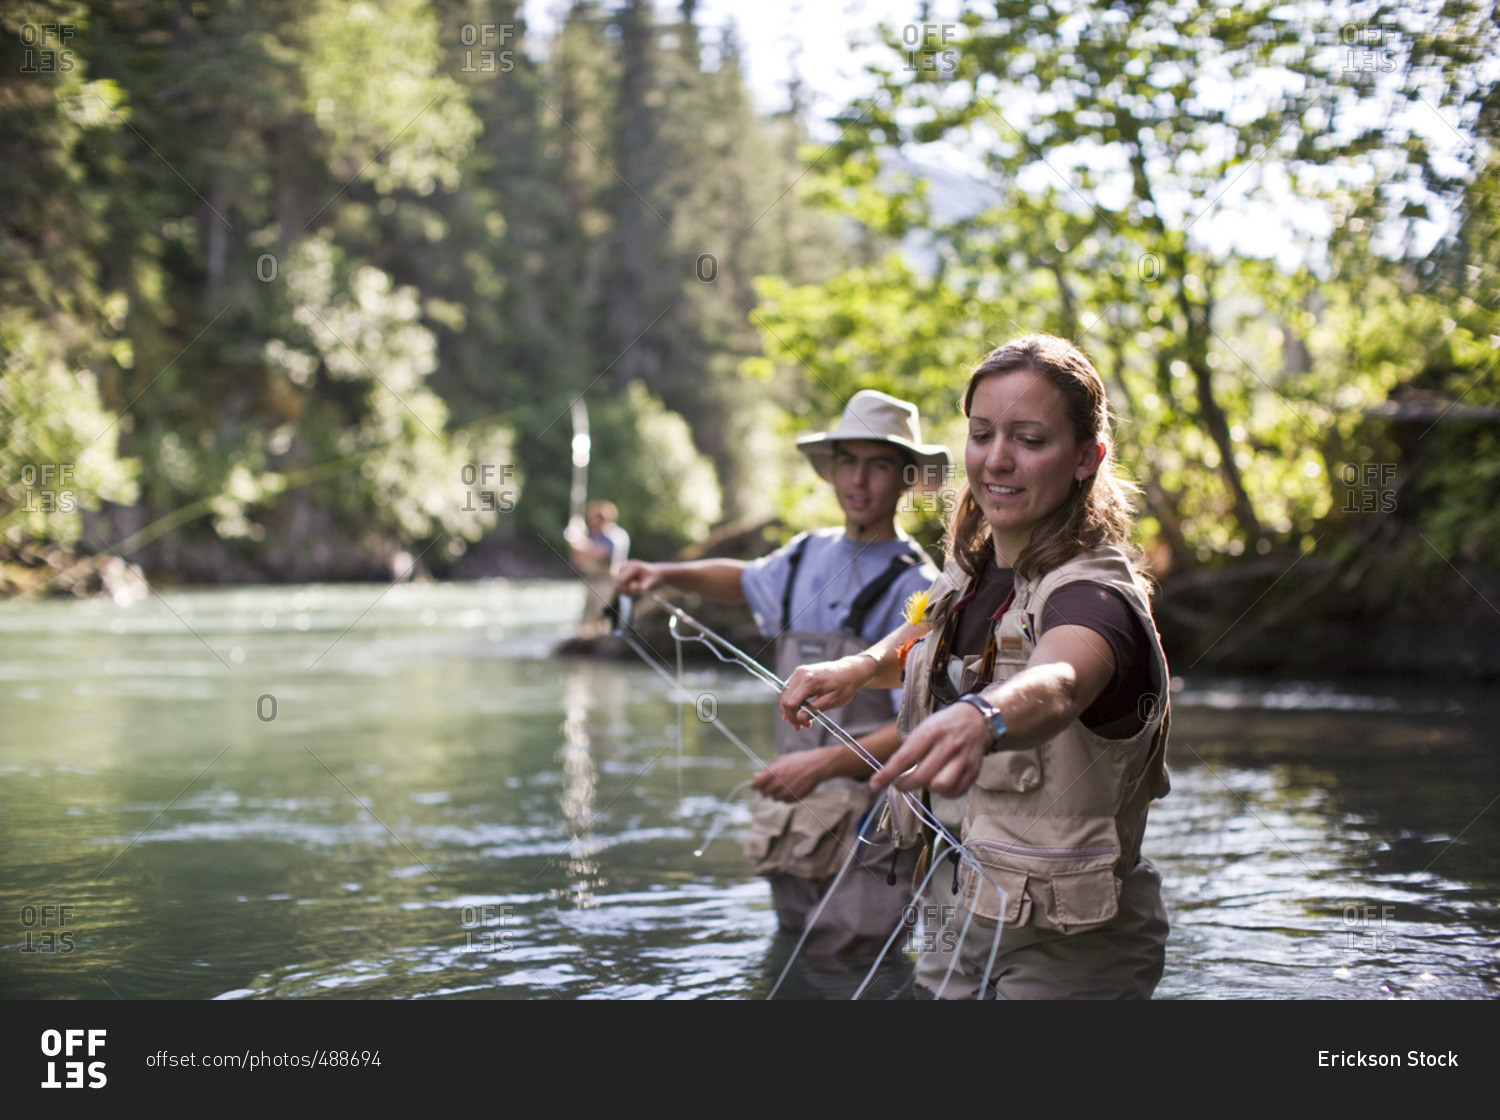 People fly fishing in a scenic forest.